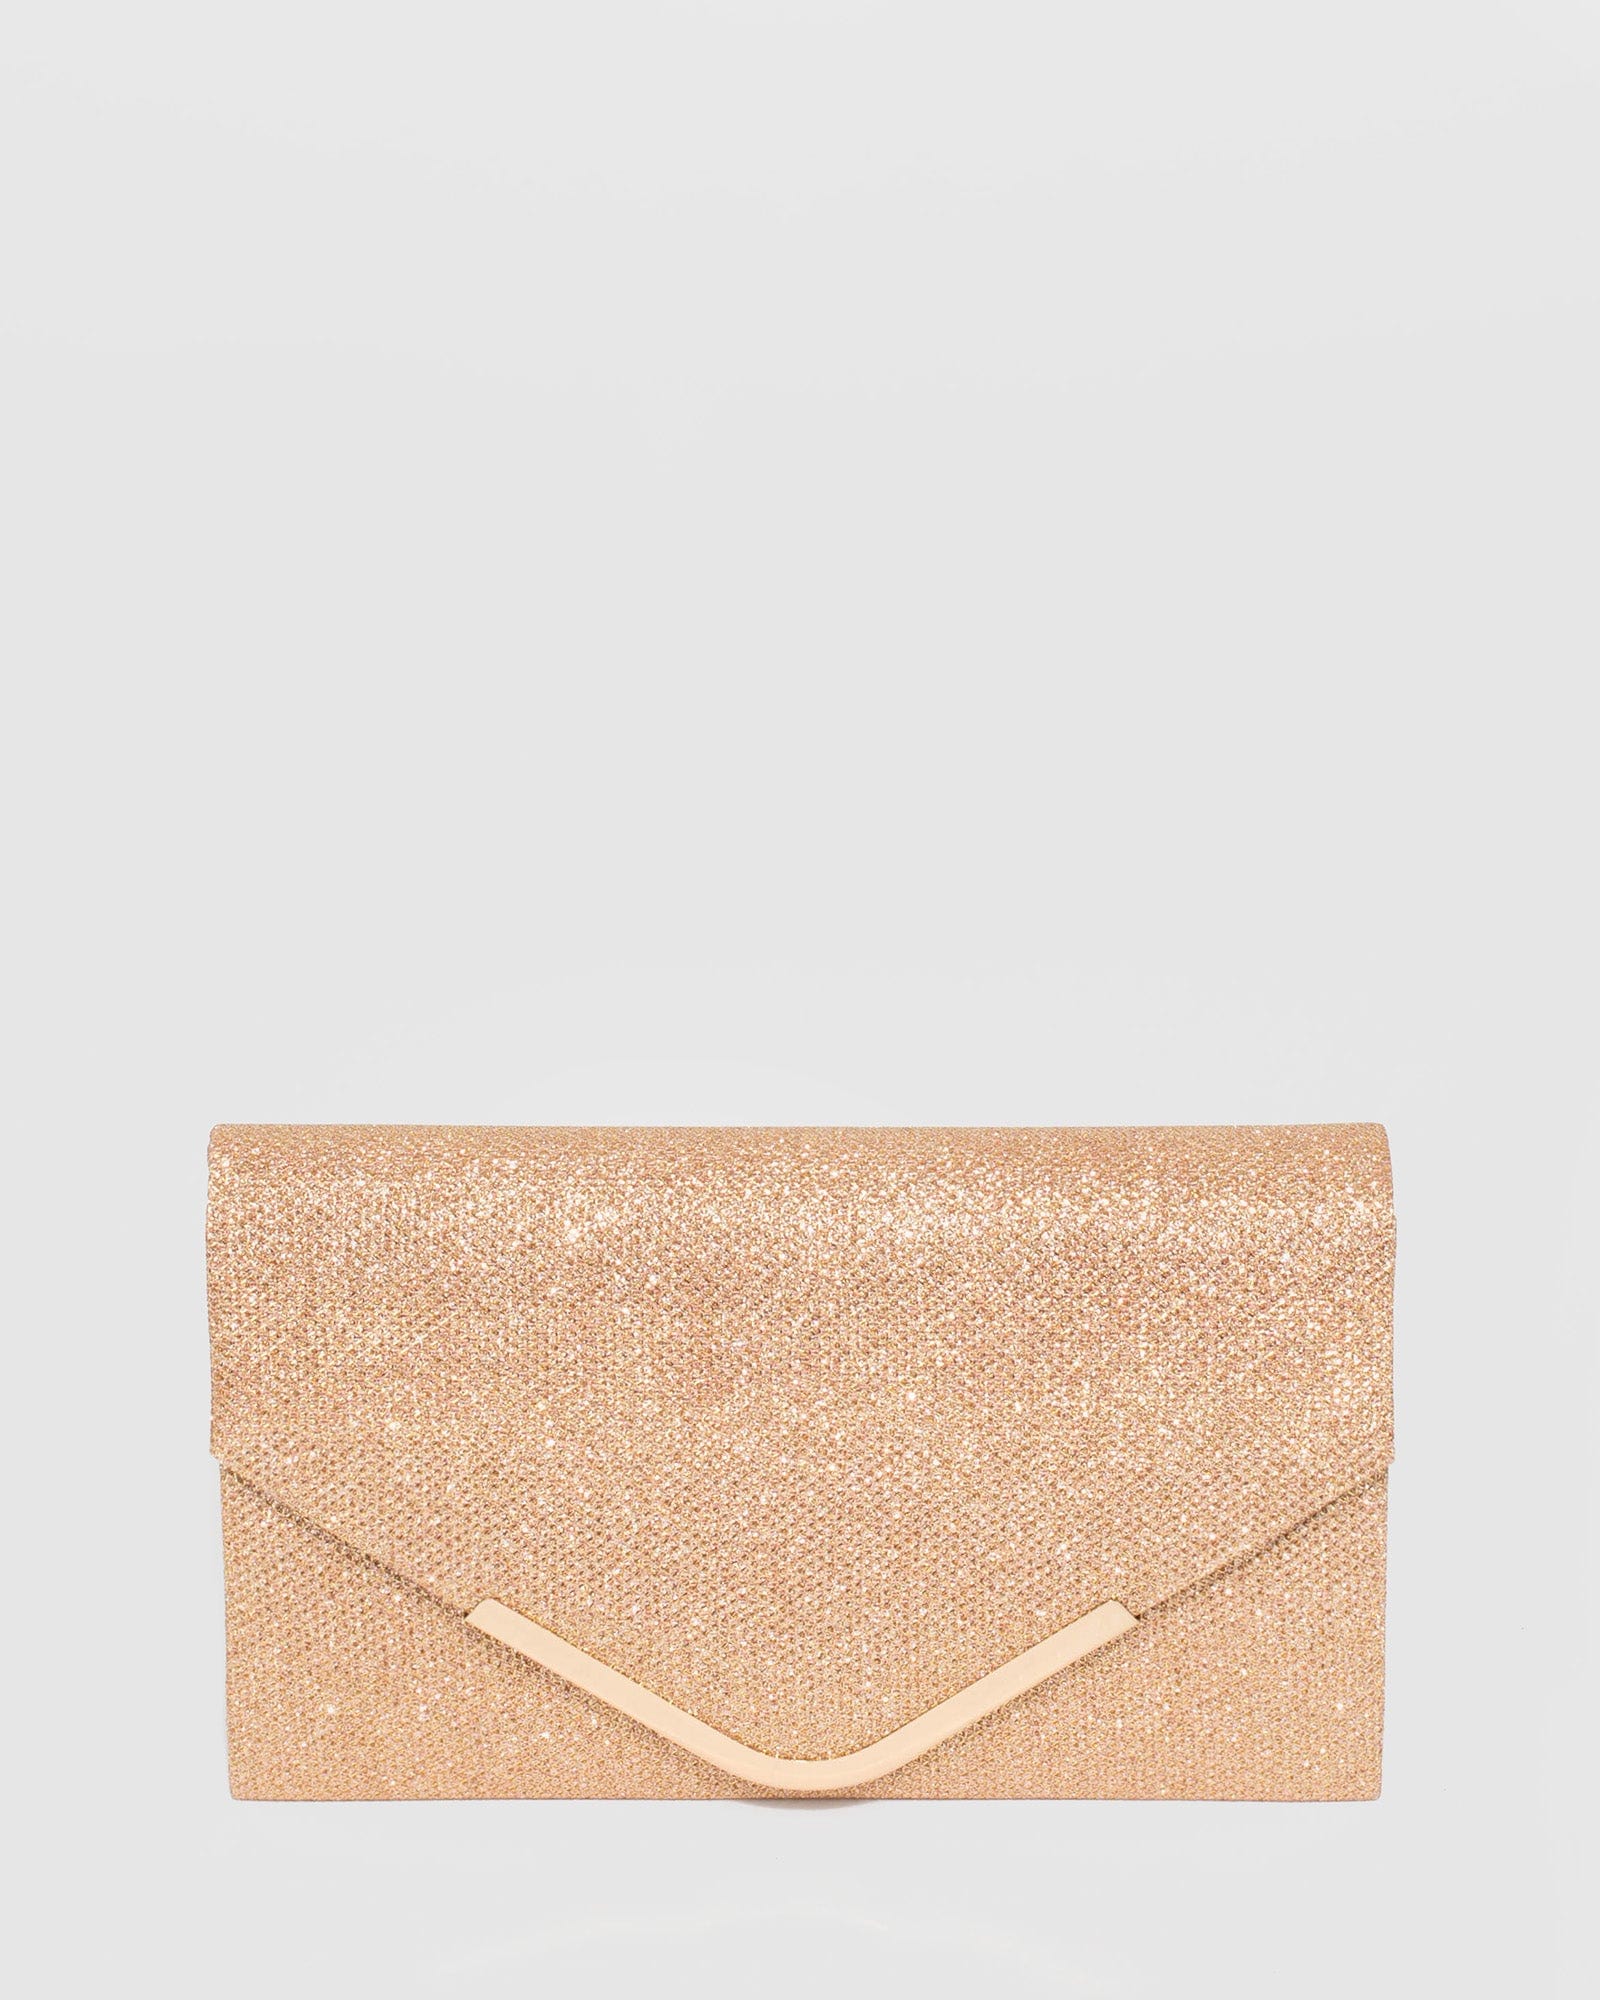 Glitter Sequin Sparkly Shoulder Bag With Gold Chain Strap Shiny Crossbody  Purse With Fashionable Letter Inside, Zipper Pocket, And Evening Closure  From Cyc1222, $75.73 | DHgate.Com